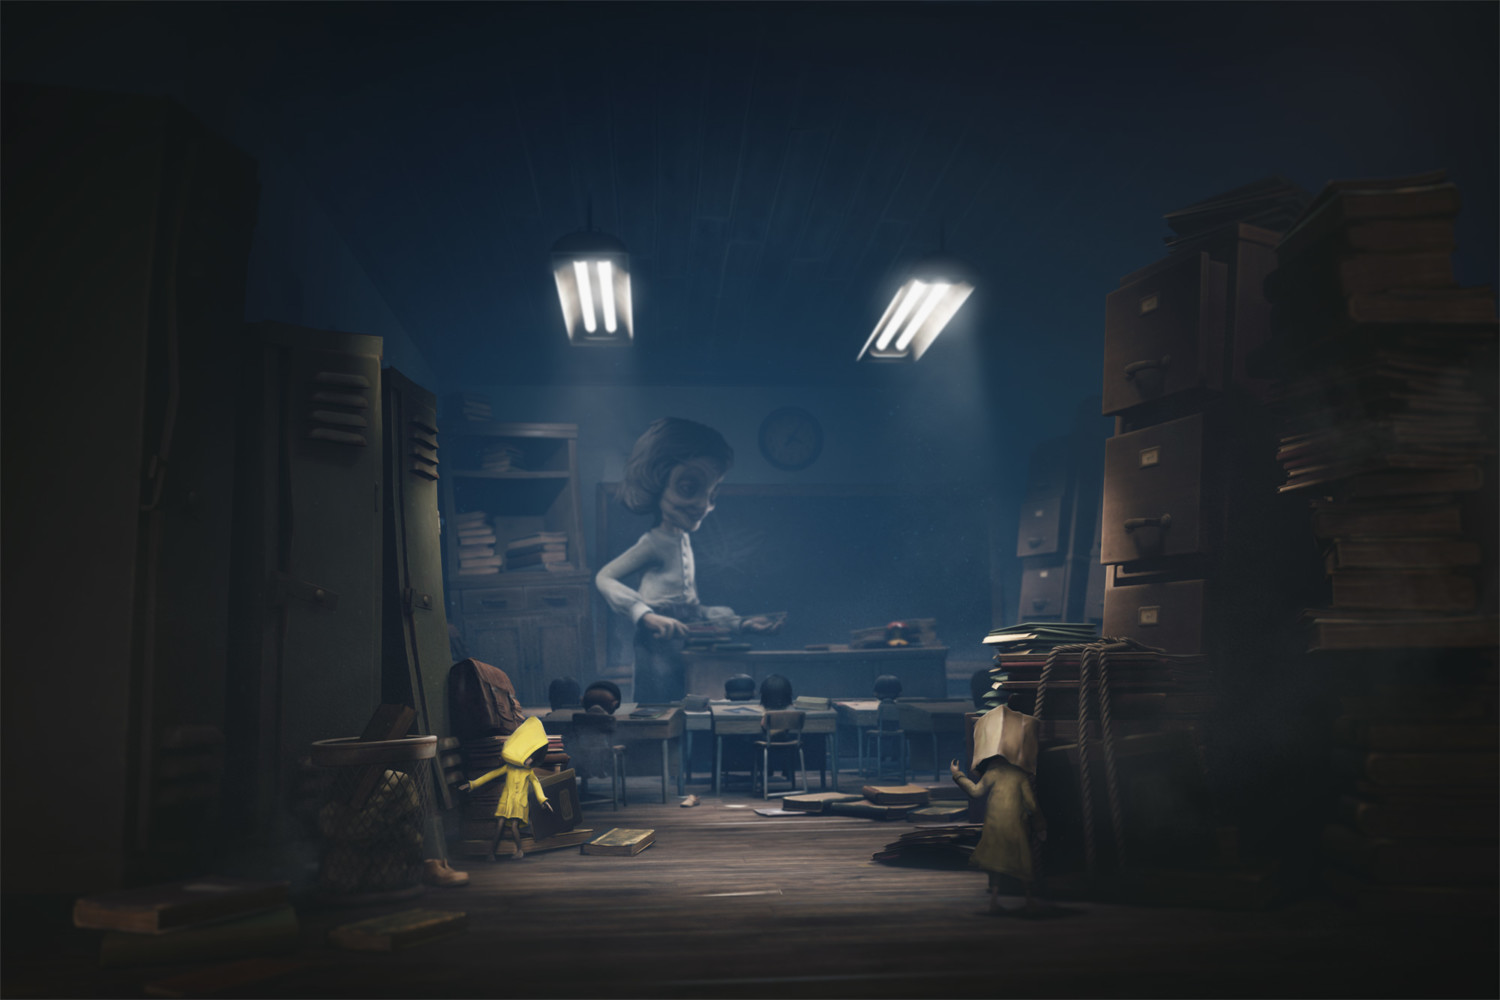 A free Little Nightmares 2 demo is available to download now